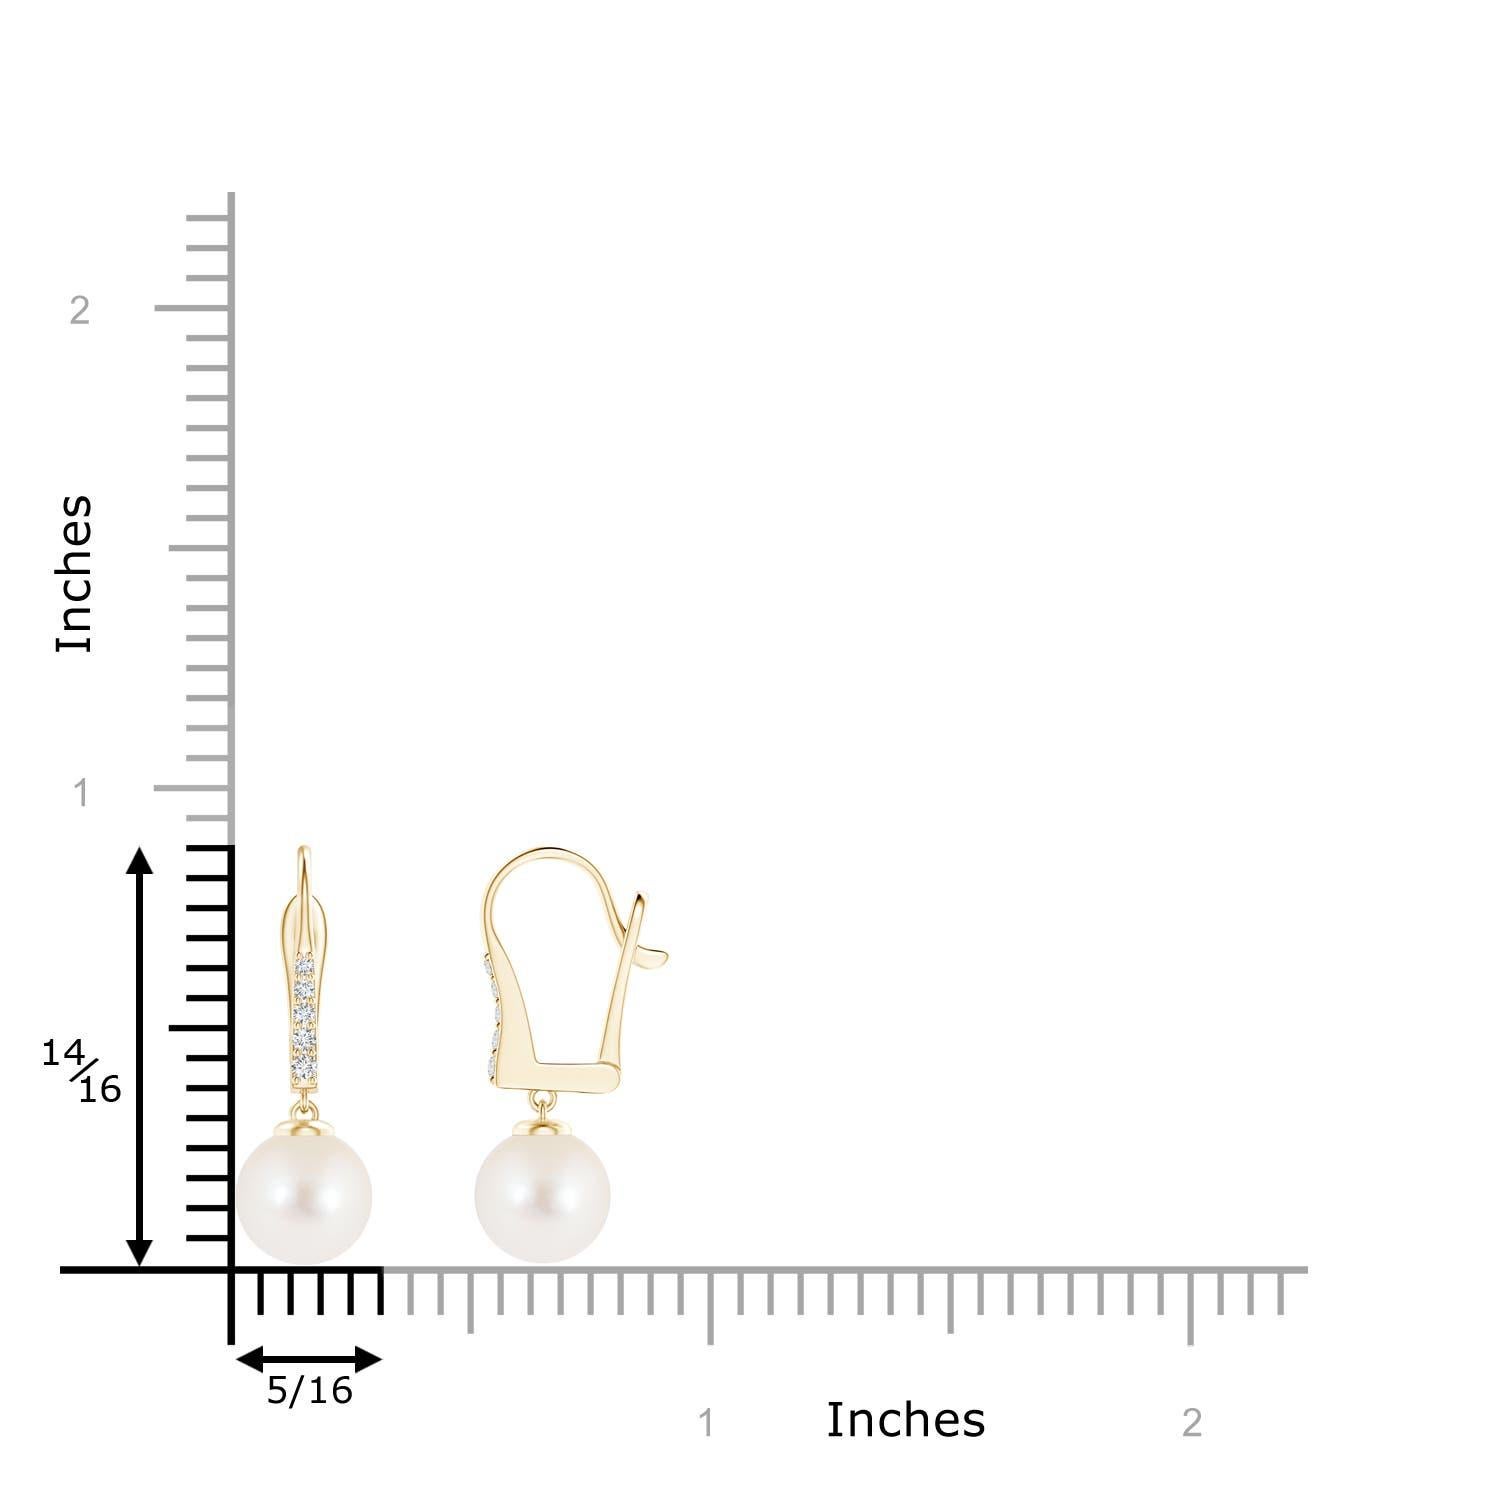 These lever back drop earrings are adorned with Freshwater cultured pearls that glisten magnificently. The pearls are secured to diamond-studded lever backs that add an extra dose of beauty to these solitaire pearl earrings. The glistening diamonds